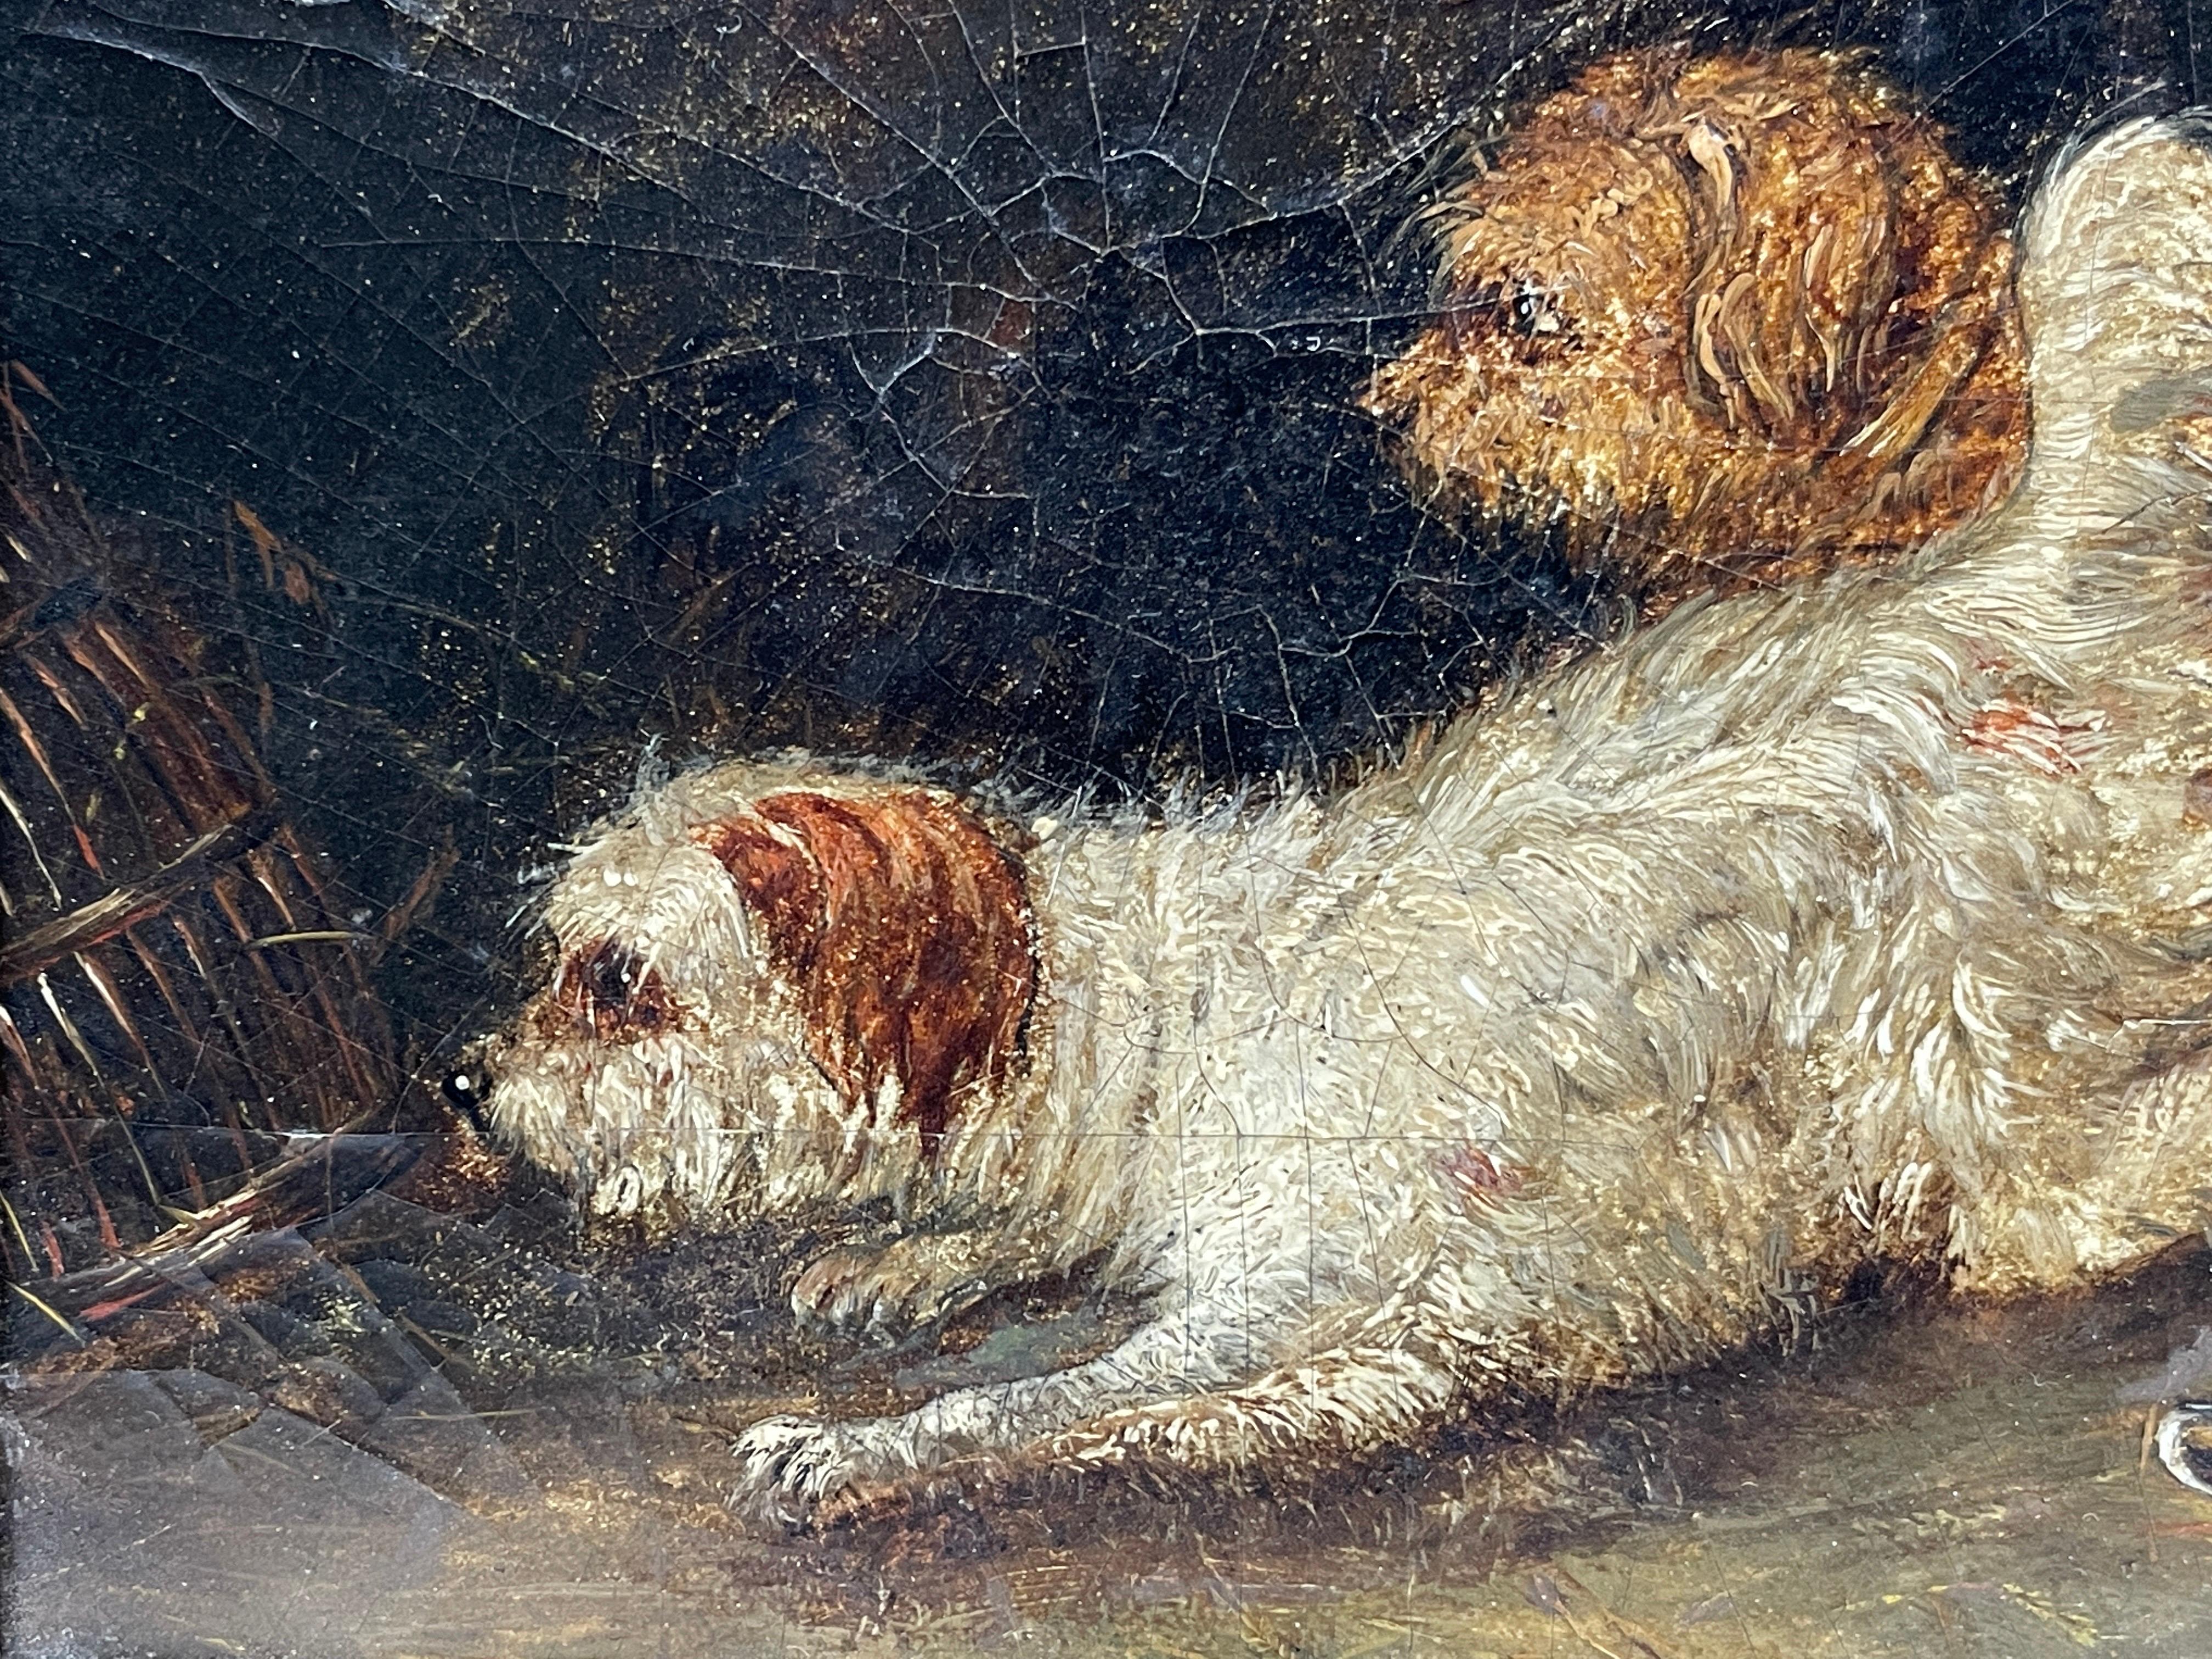 Terriers Ratting in Barn Interior
English School, 19th century
oil painting on board, framed
framed size: 9.5 x 11 inches
condition: good condition, a few signs of age but basically good and presentable. The frame is antique and original to the